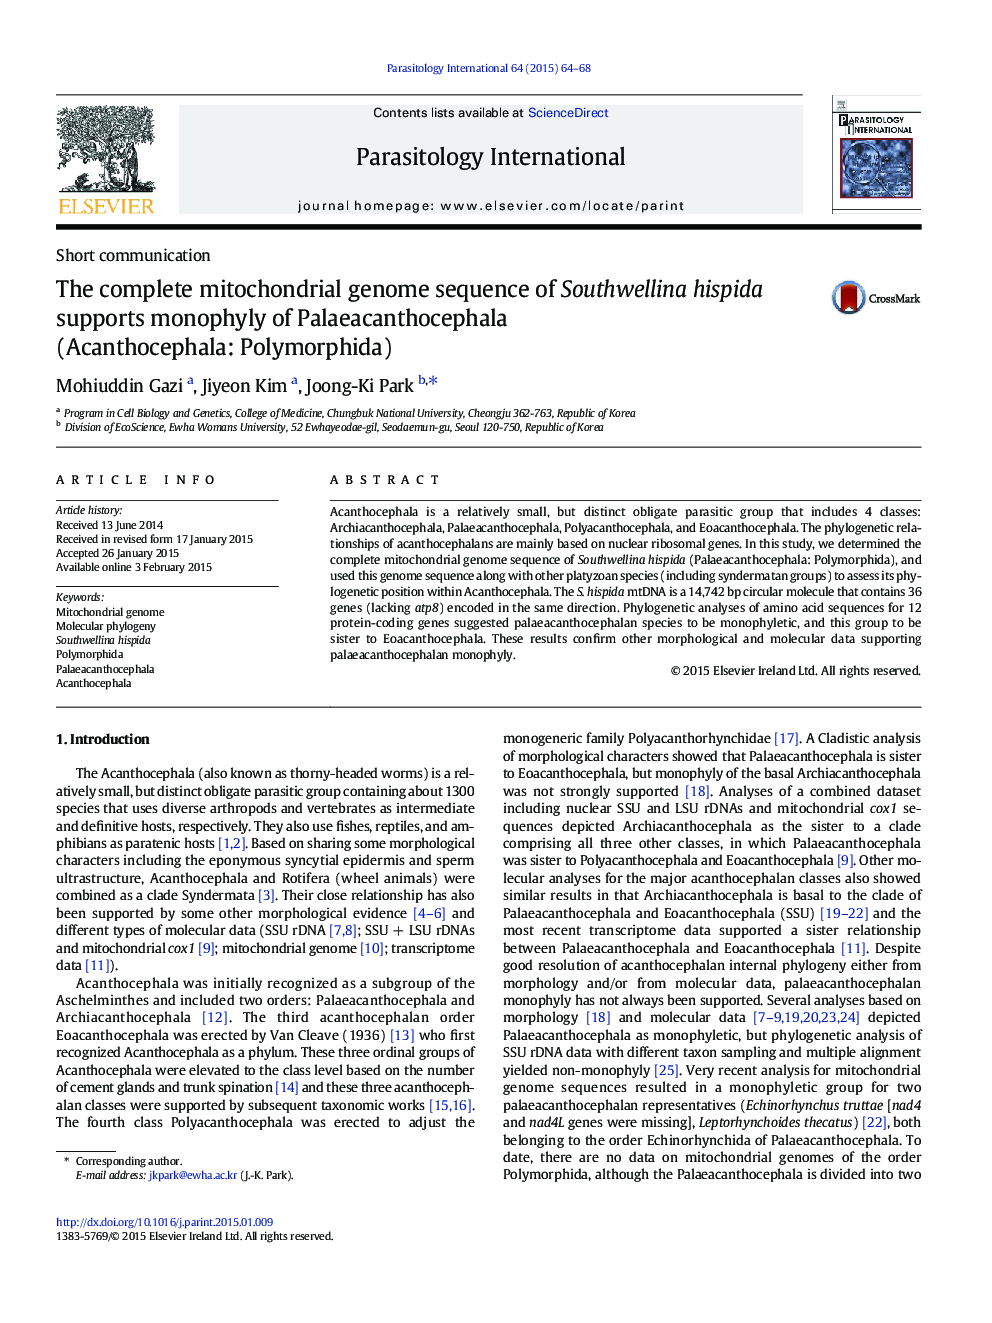 The complete mitochondrial genome sequence of Southwellina hispida supports monophyly of Palaeacanthocephala (Acanthocephala: Polymorphida)